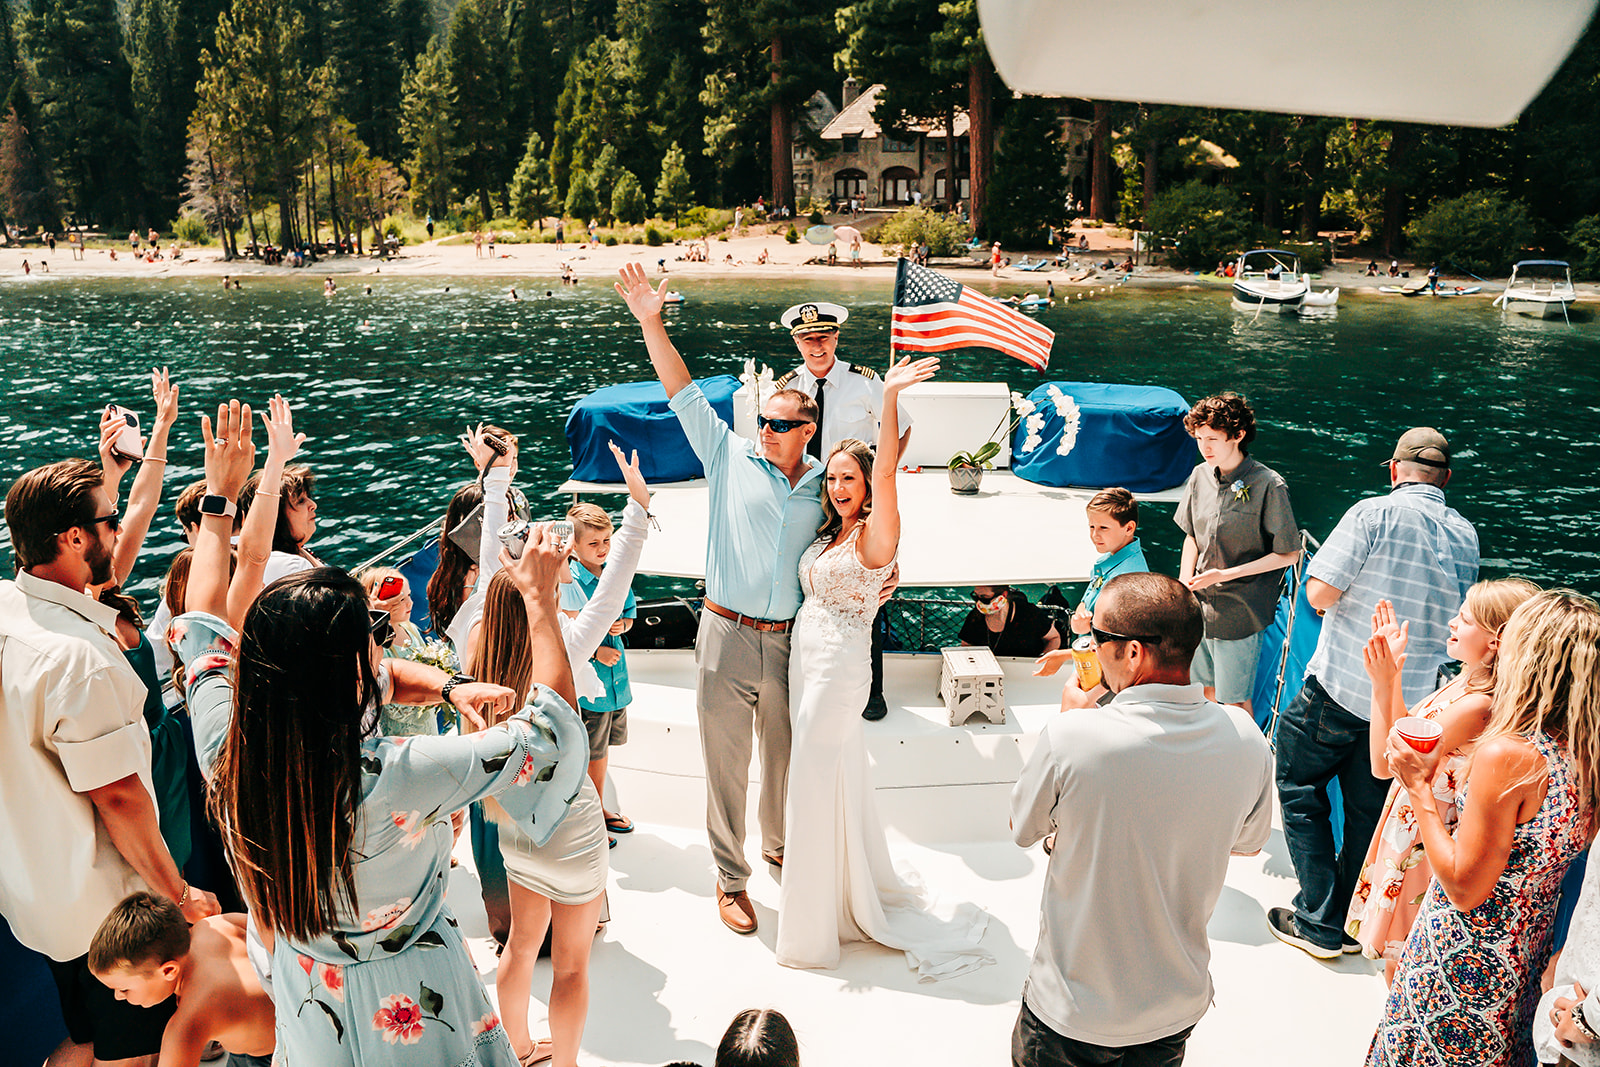 A bride and groom getting married on a party boat in Tahoe surrounded by friends and family